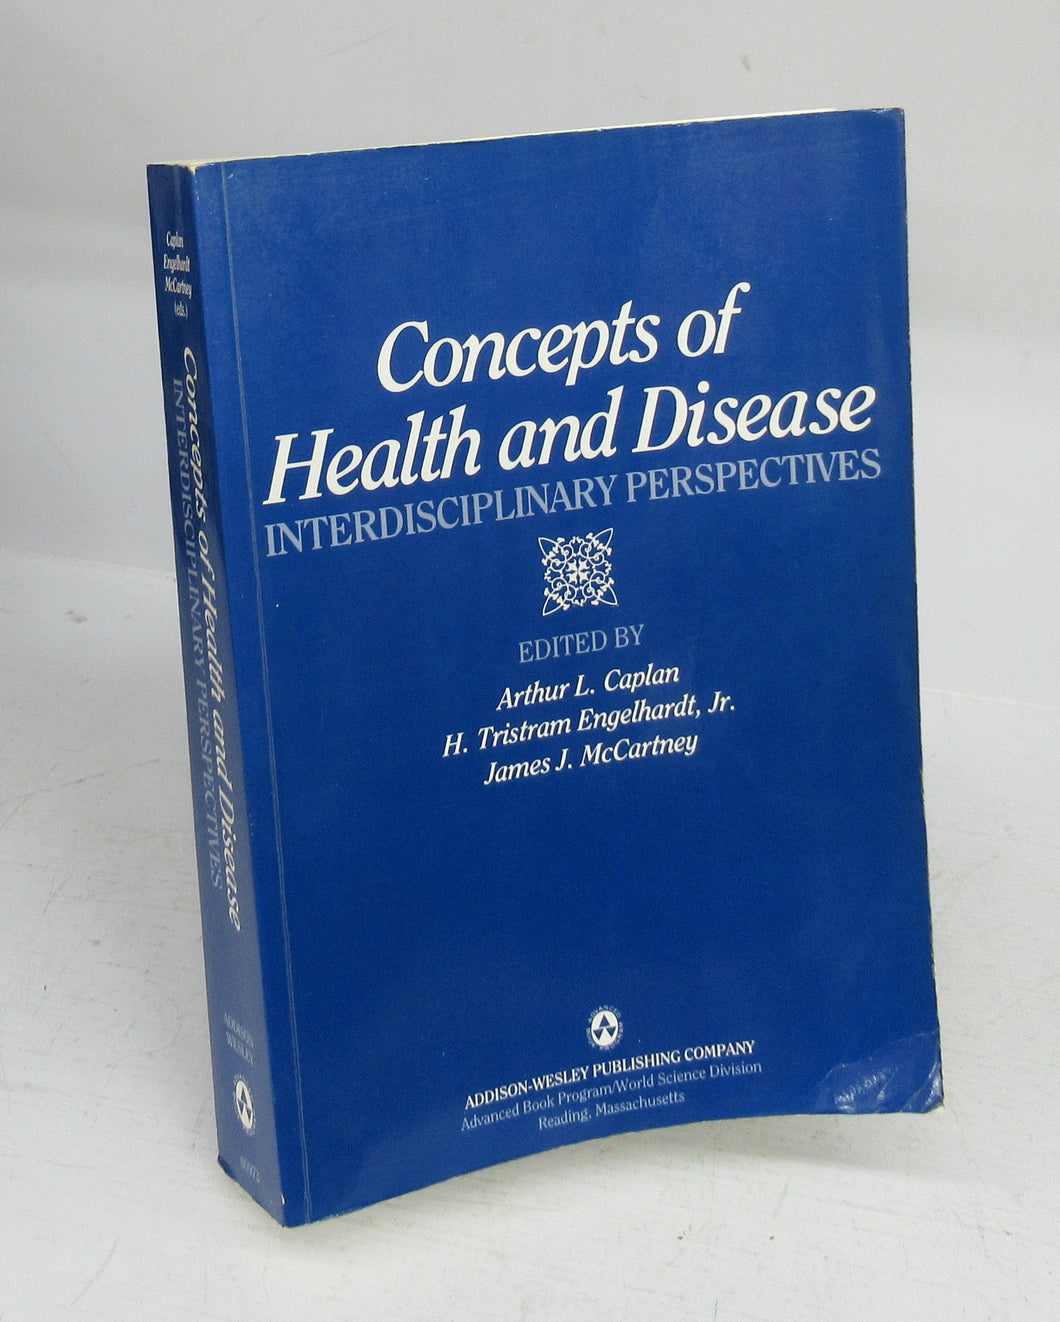 Concepts of Health and Disease: Interdisciplinary Perspectives